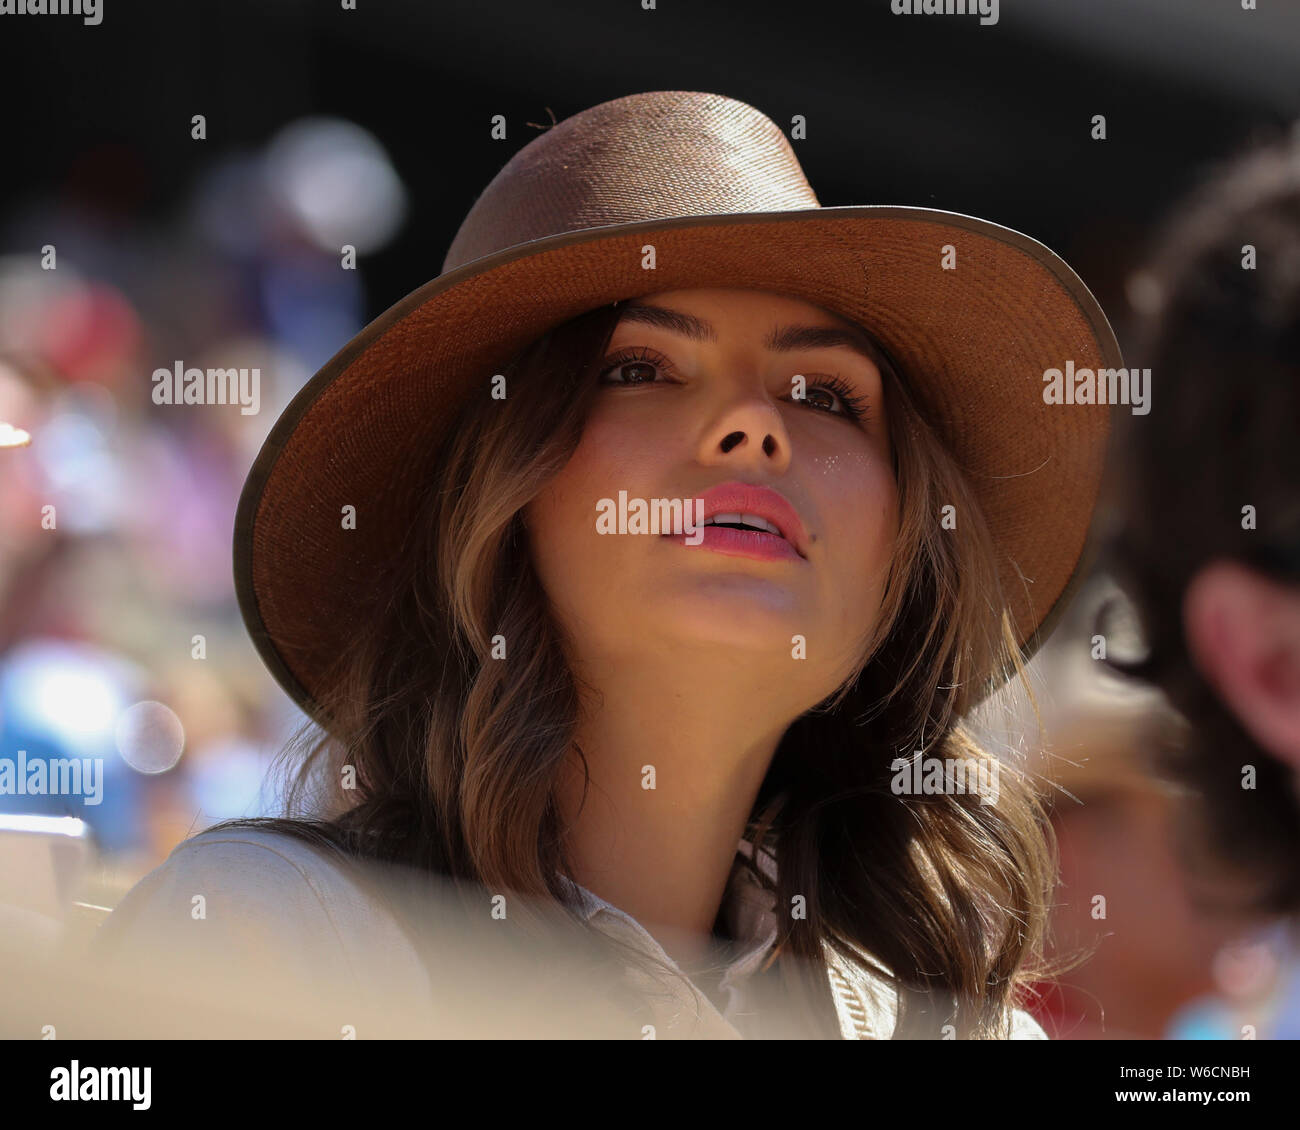 Close up of female spectator wearing a sun hat watching French Open 2019 tournament, Paris, France Stock Photo